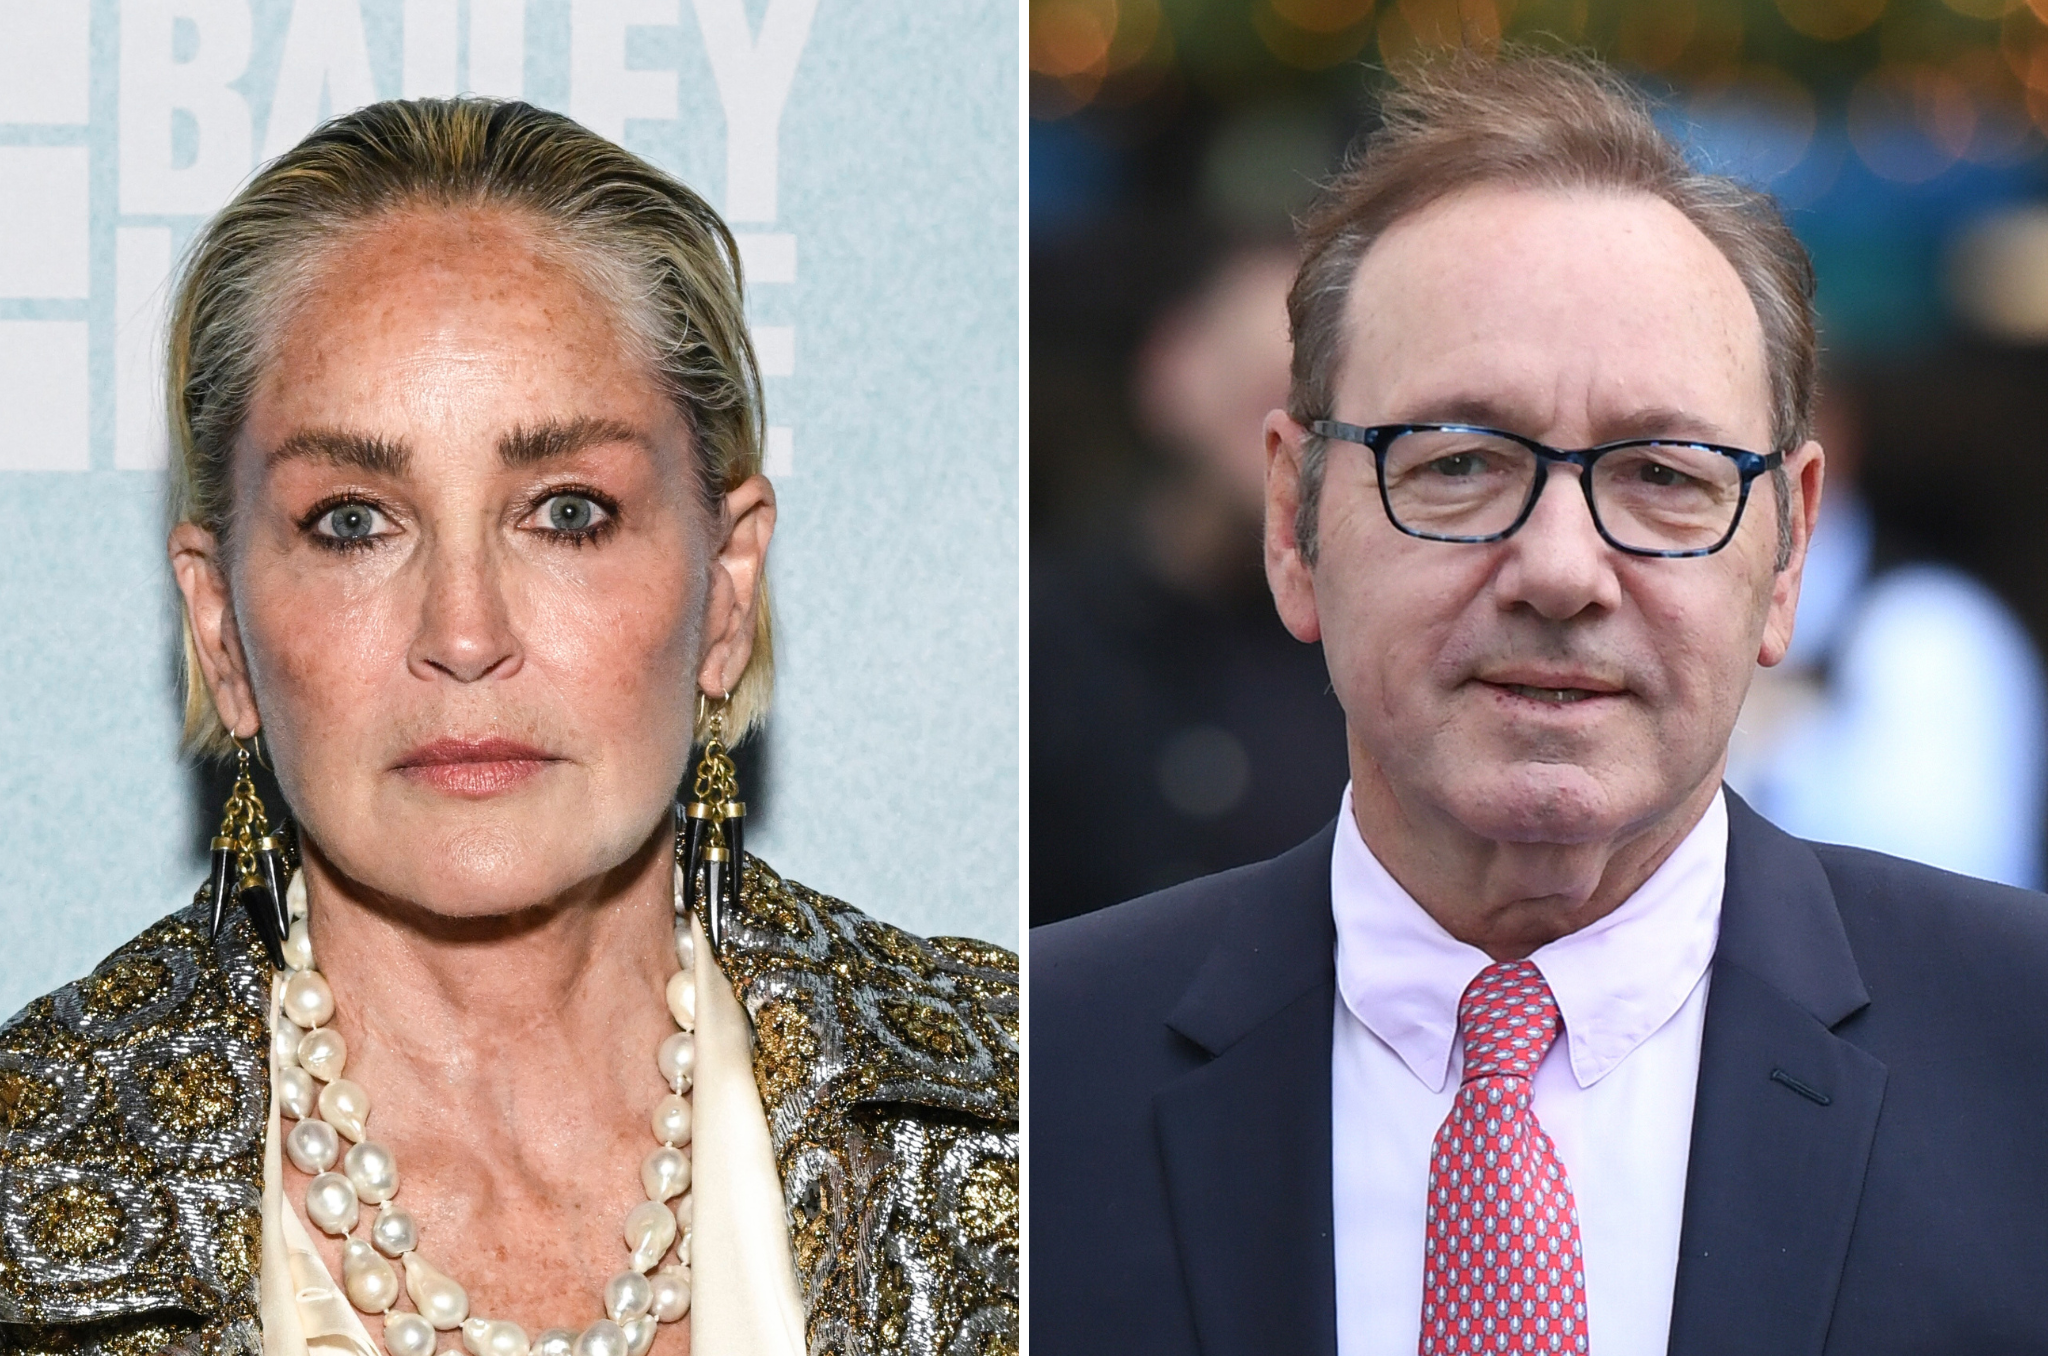 ‘That’s why he’s not allowed to come back. Because he offended men,’ Sharon Stone said of Kevin Spacey